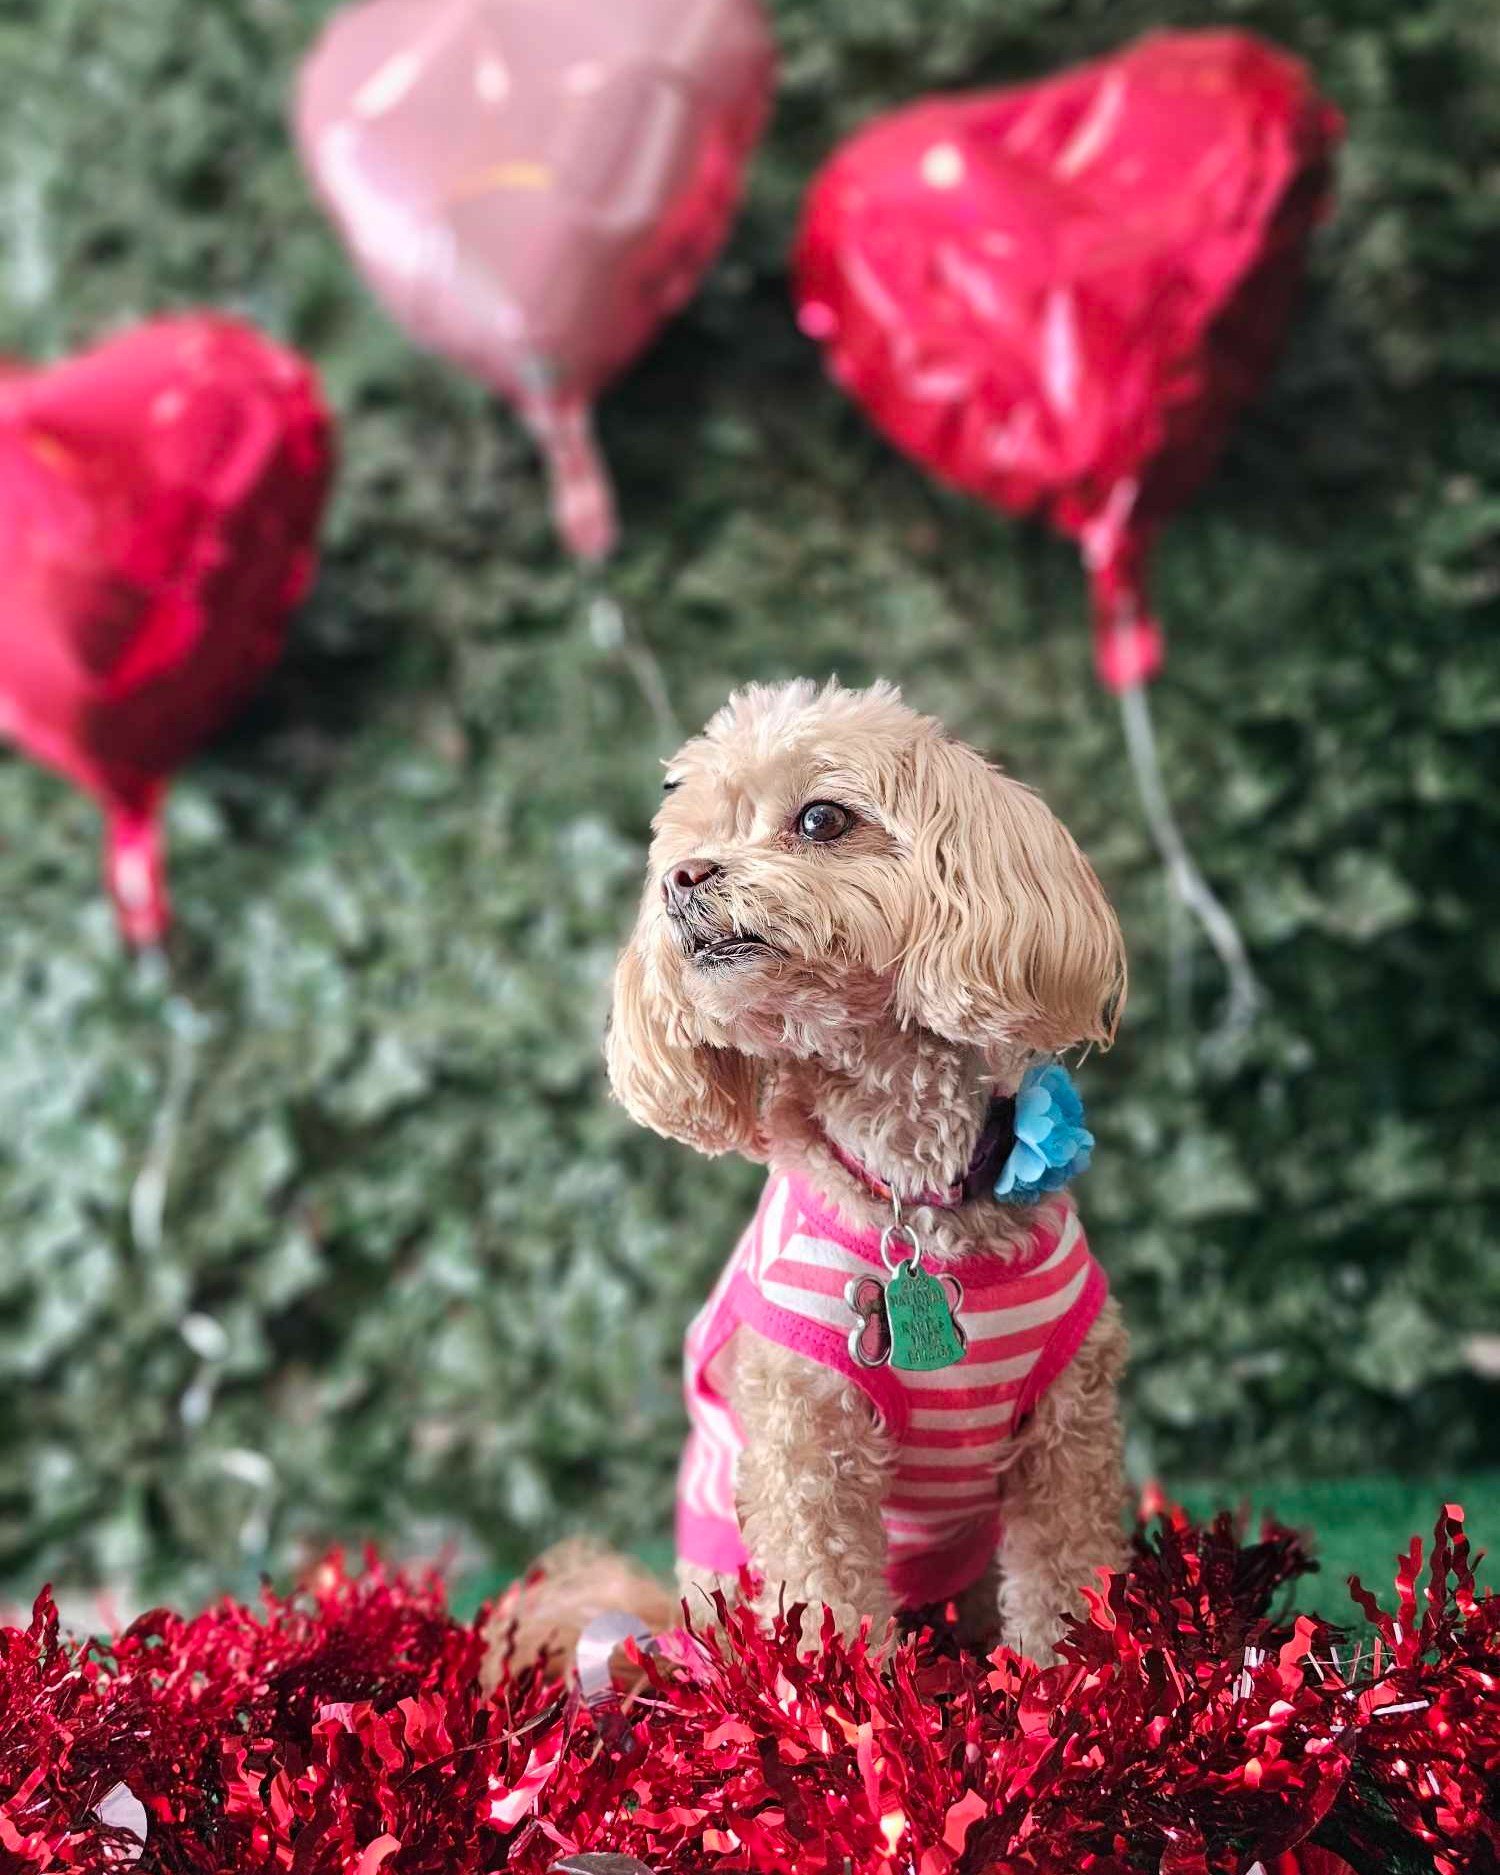 Happy Valentine's Day from MiaBella, our Therapy Dog Extraordinaire! 

Today, she's spreading love and reminding us of the joy and companionship pets add to our lives. Just like in therapy, understanding and compassion are at the heart of every conne